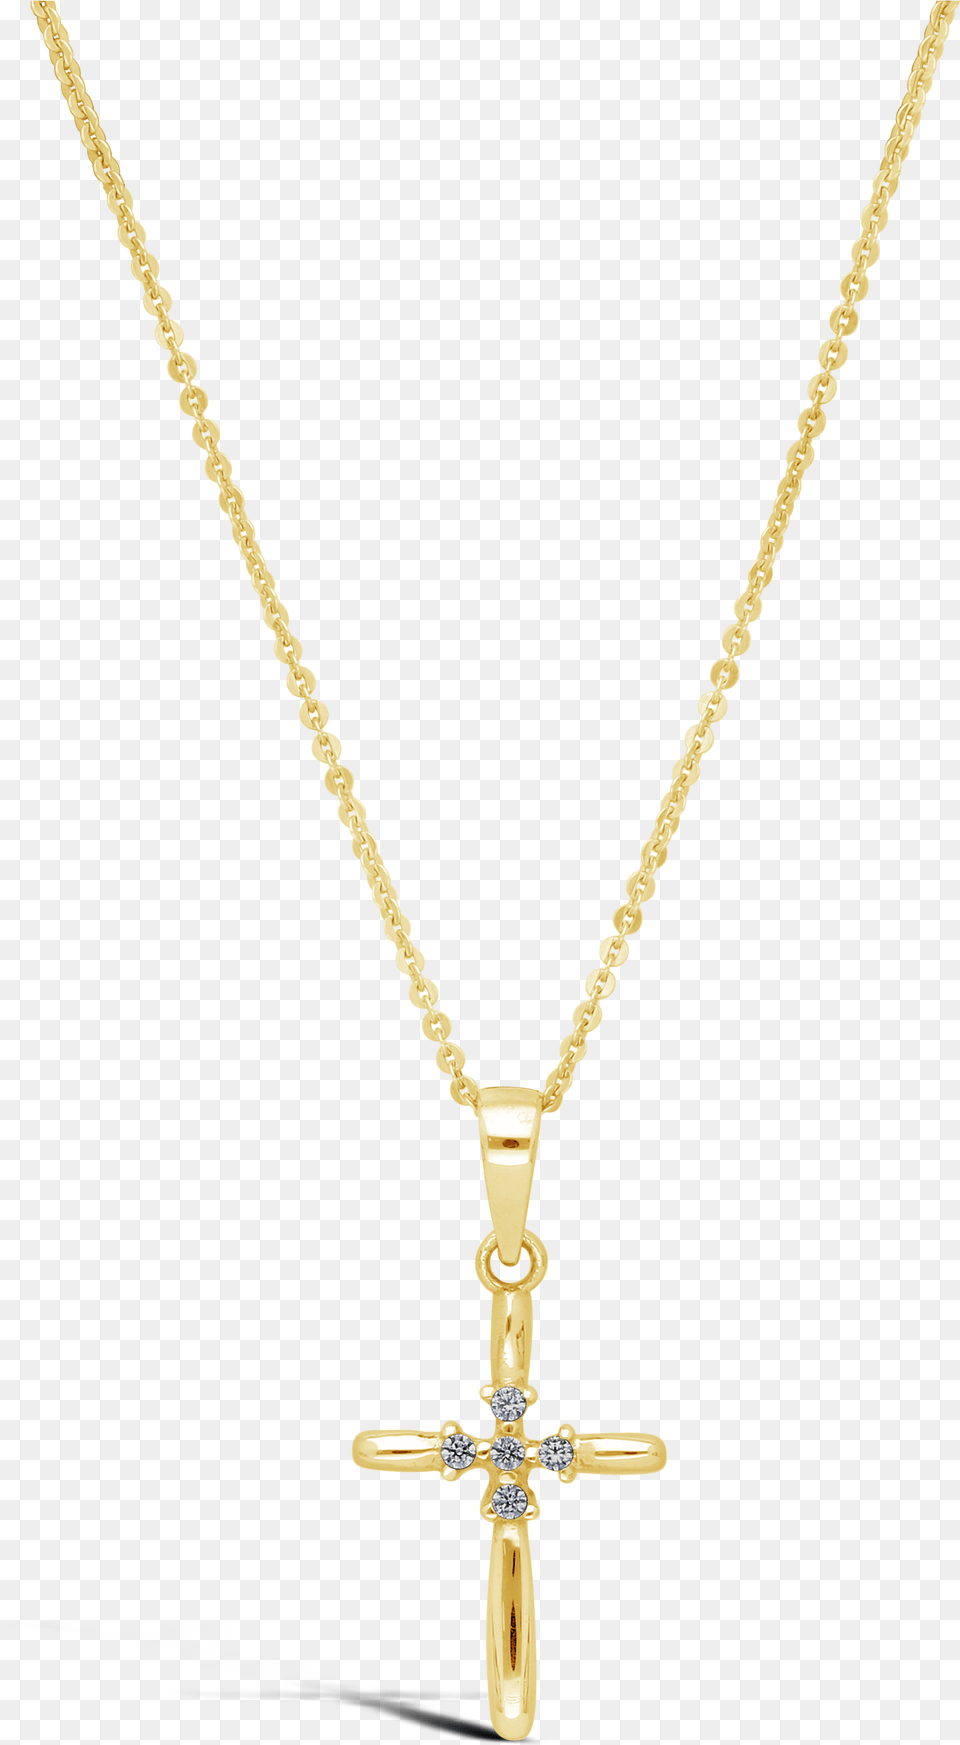 Sydney Evan Ruby Matchstick Charm Necklace Gold Chain Men Cross, Accessories, Jewelry, Symbol, Pendant Png Image